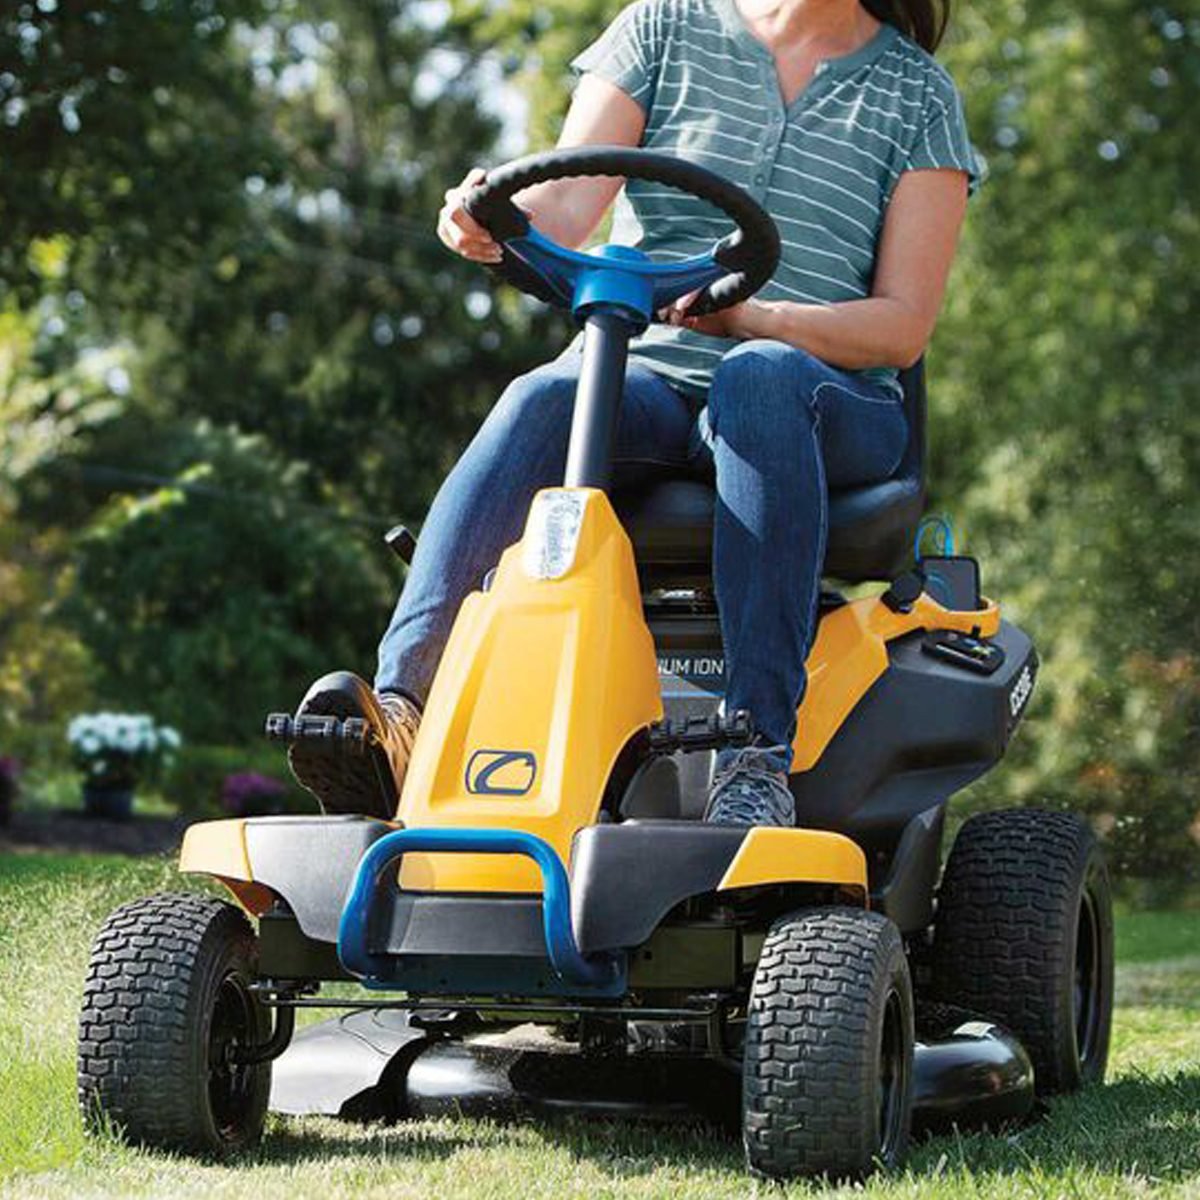 The Cub Cadet Riding Mower Line Makes Mowing Easy and Enjoyable